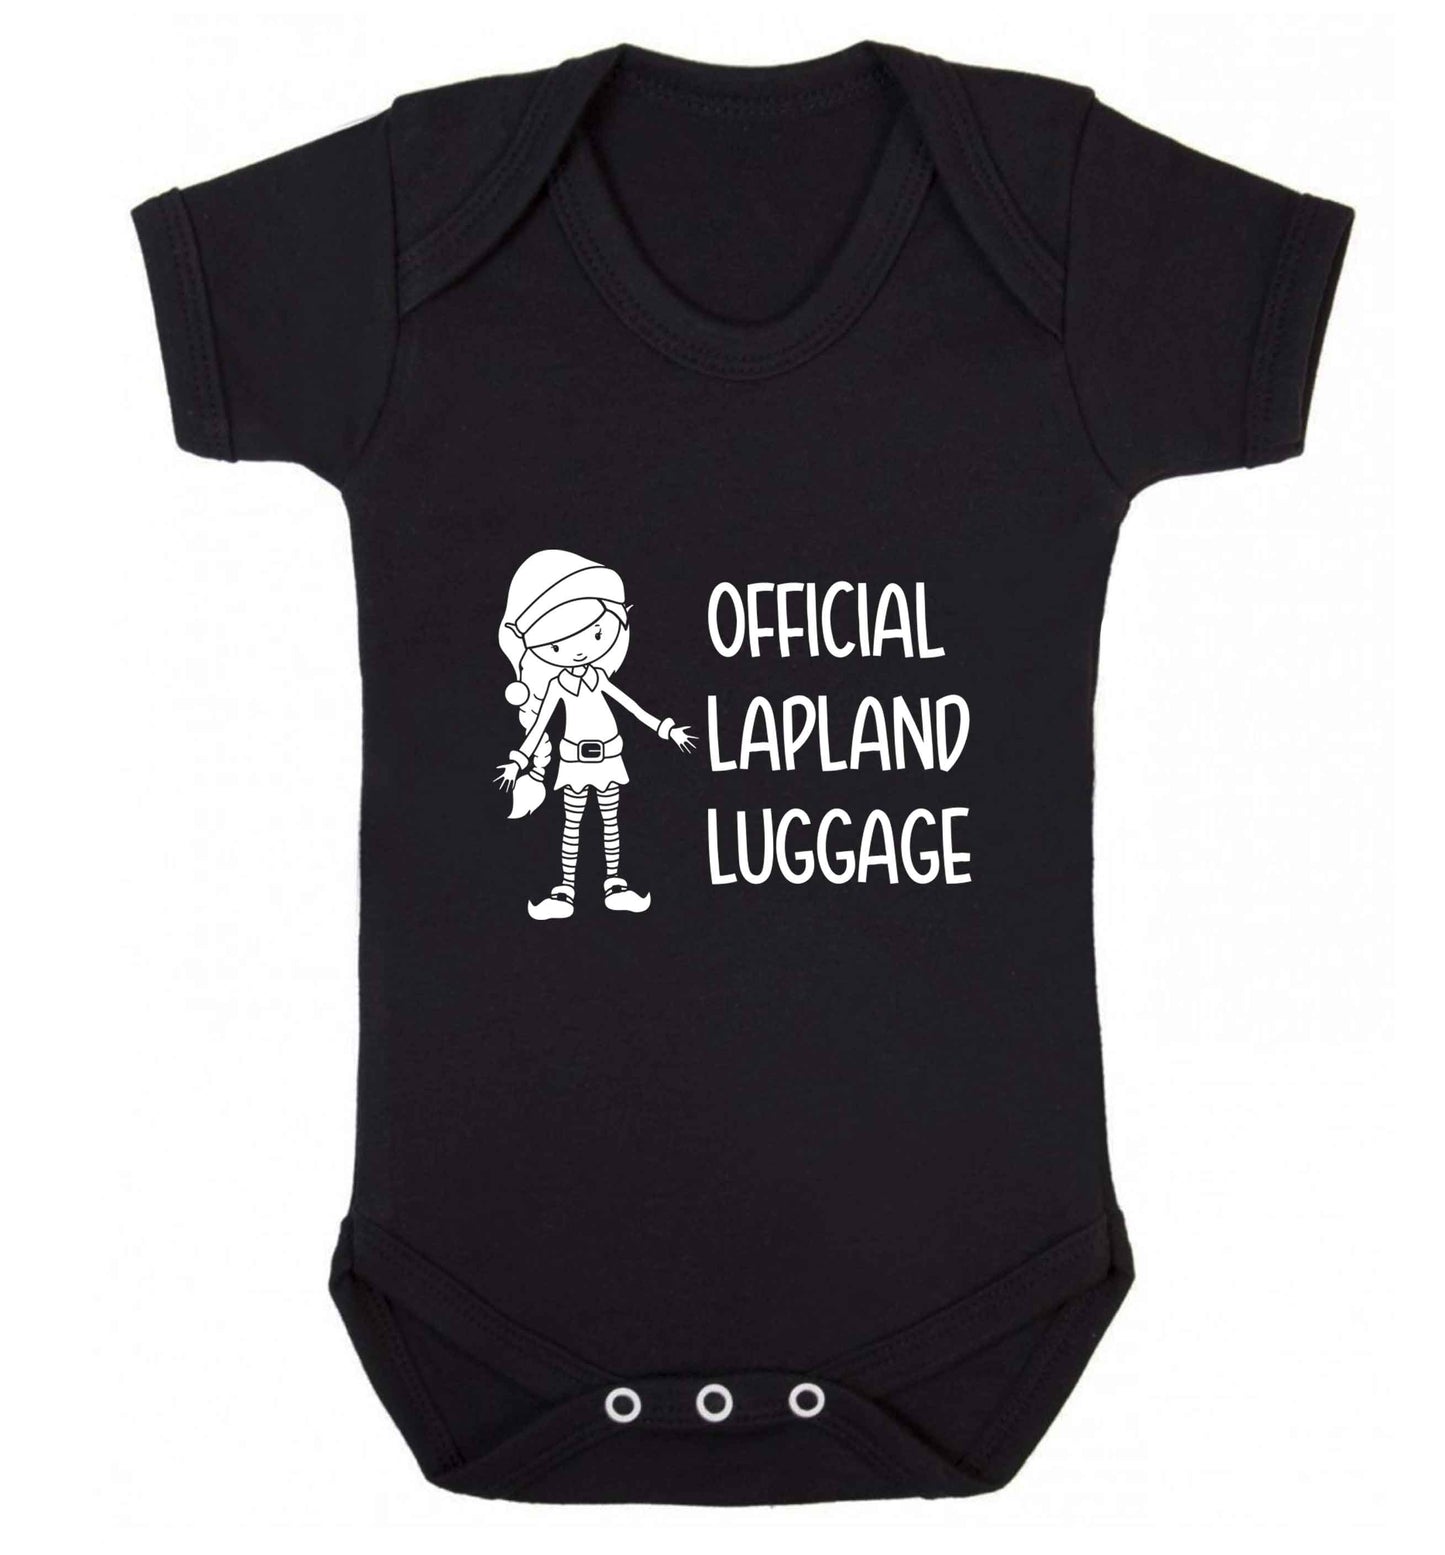 Official lapland luggage - Elf snowflake baby vest black 18-24 months